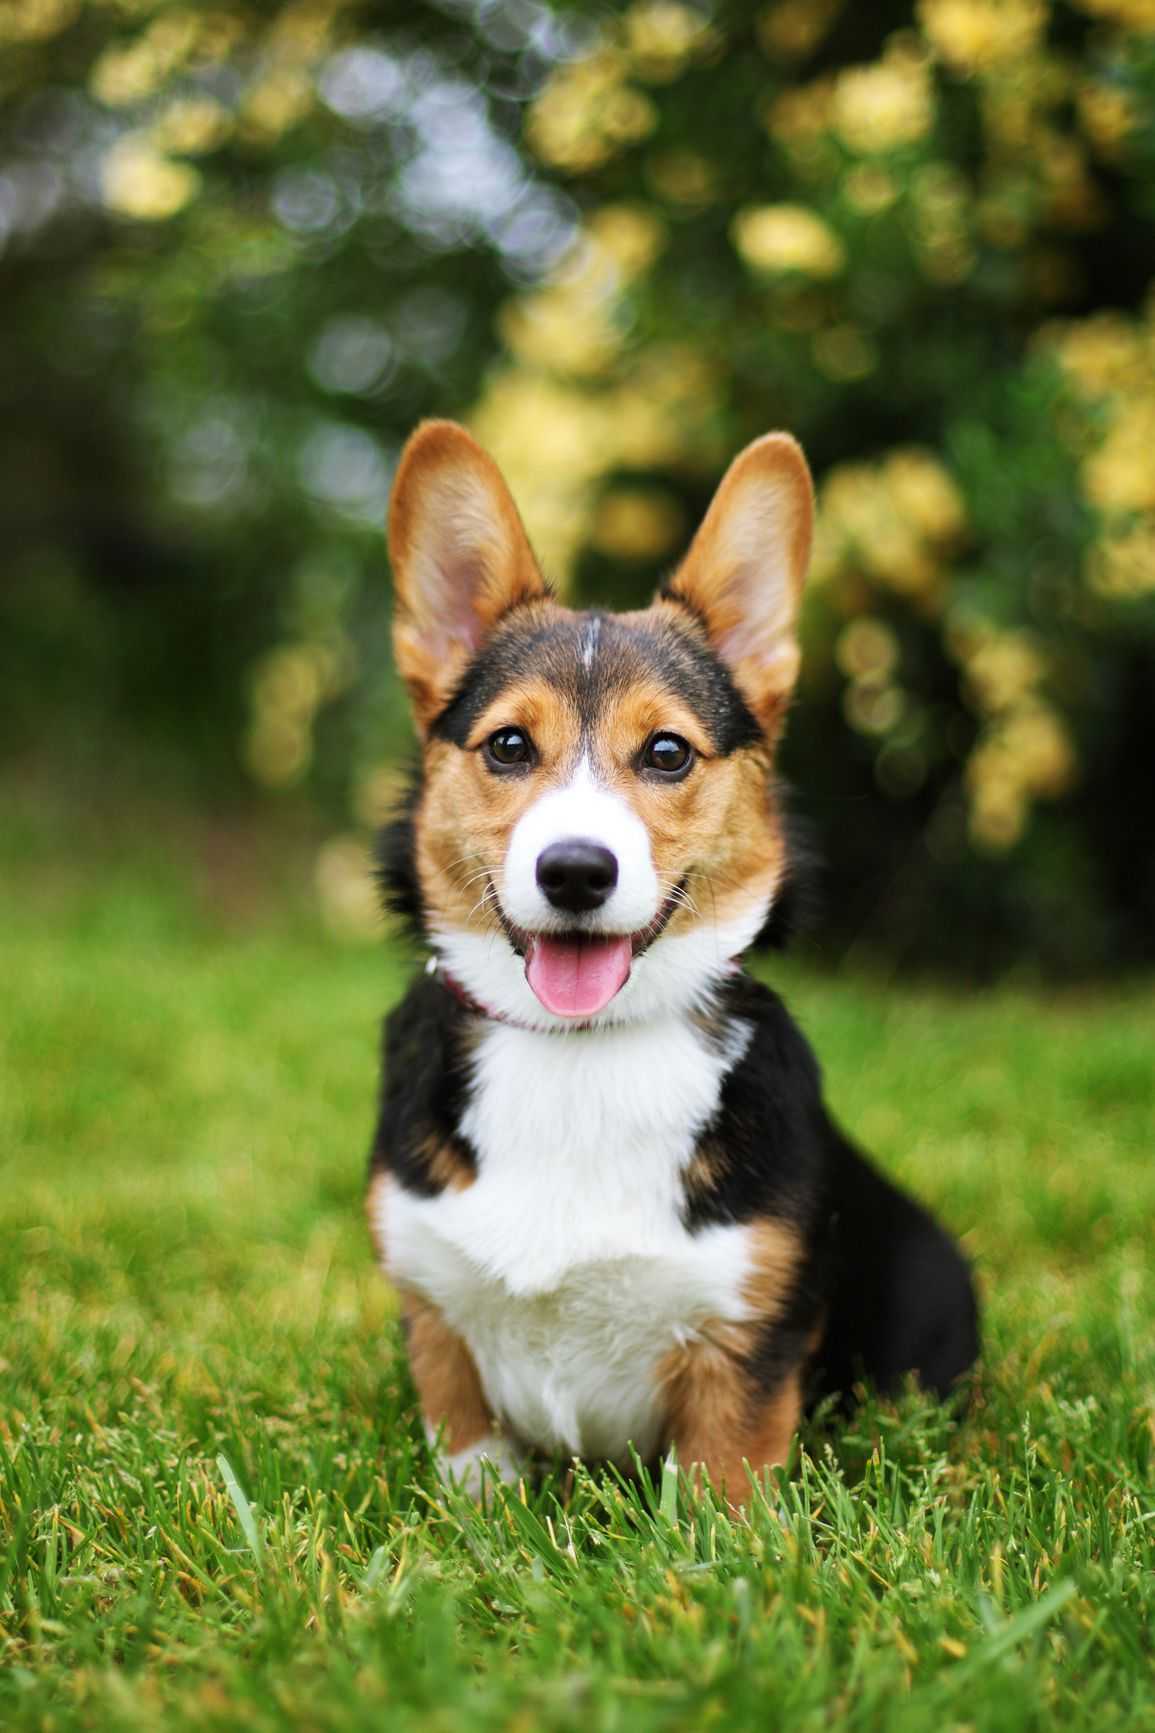 adorable dog breeds. cutest dog breeds most adorable dogs - gw2.us